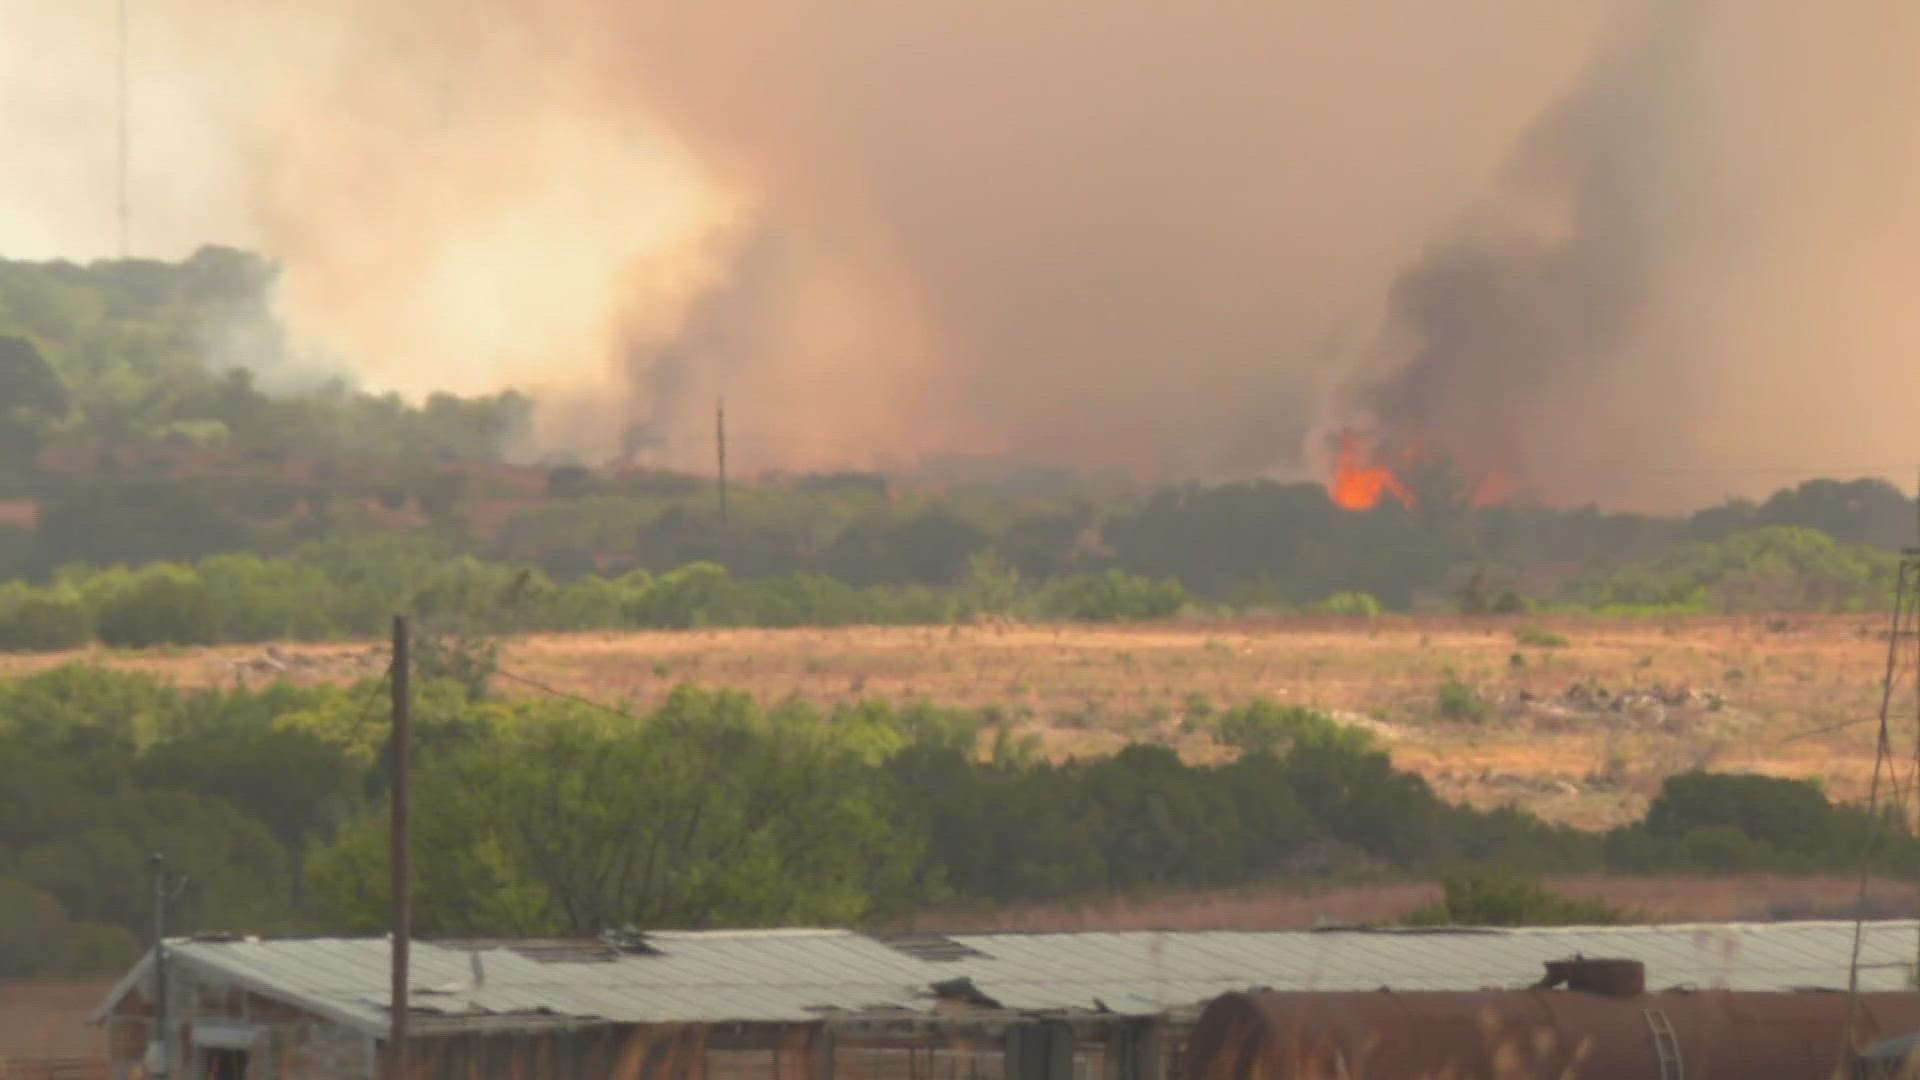 Officials say the fire, which has burned hundreds of acres, may have started from a group of workers who were welding.